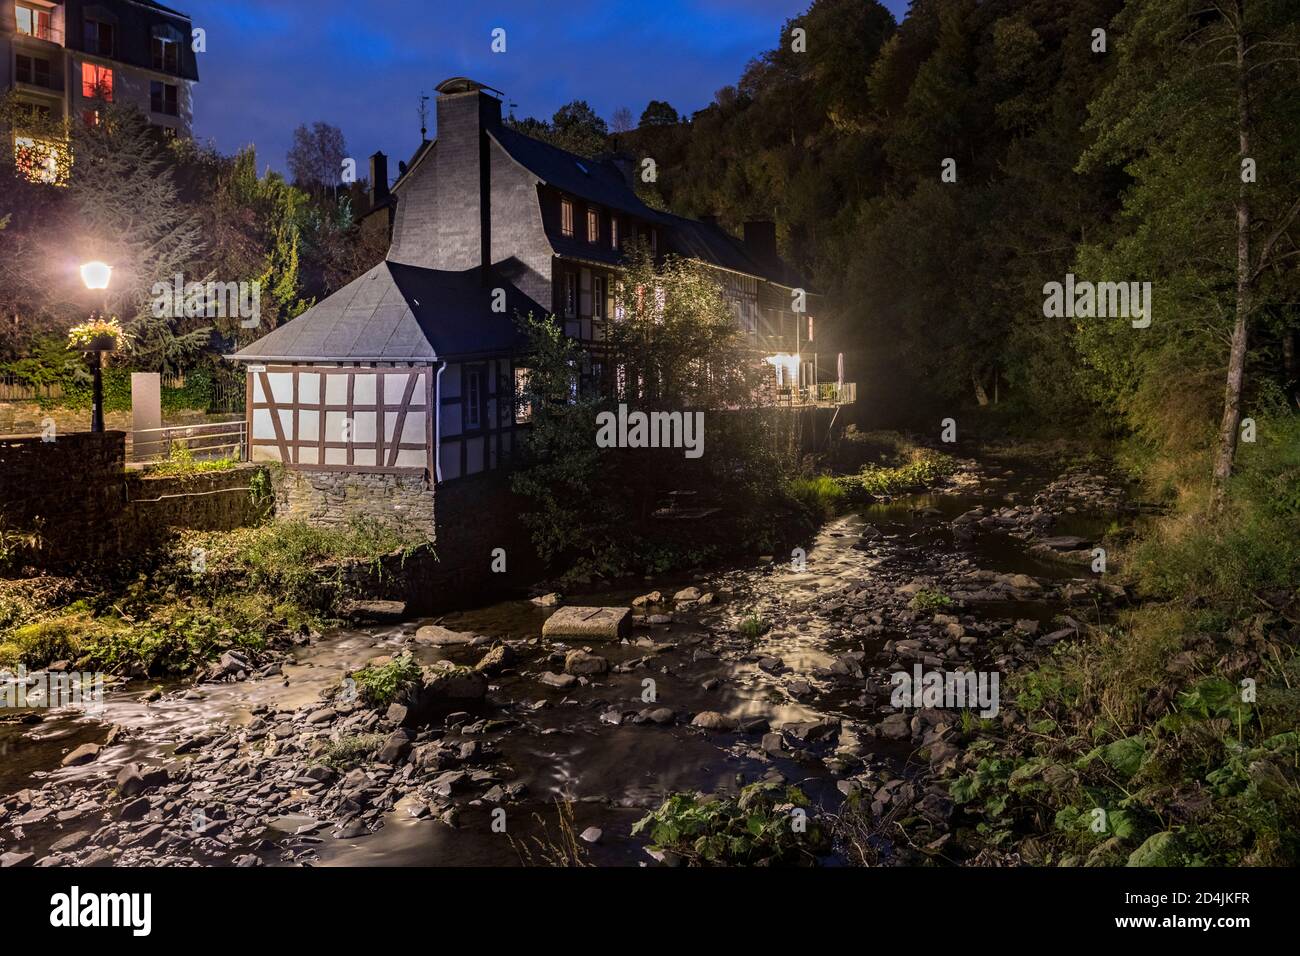 Half-timbered house on the Rur in Monschau Stock Photo